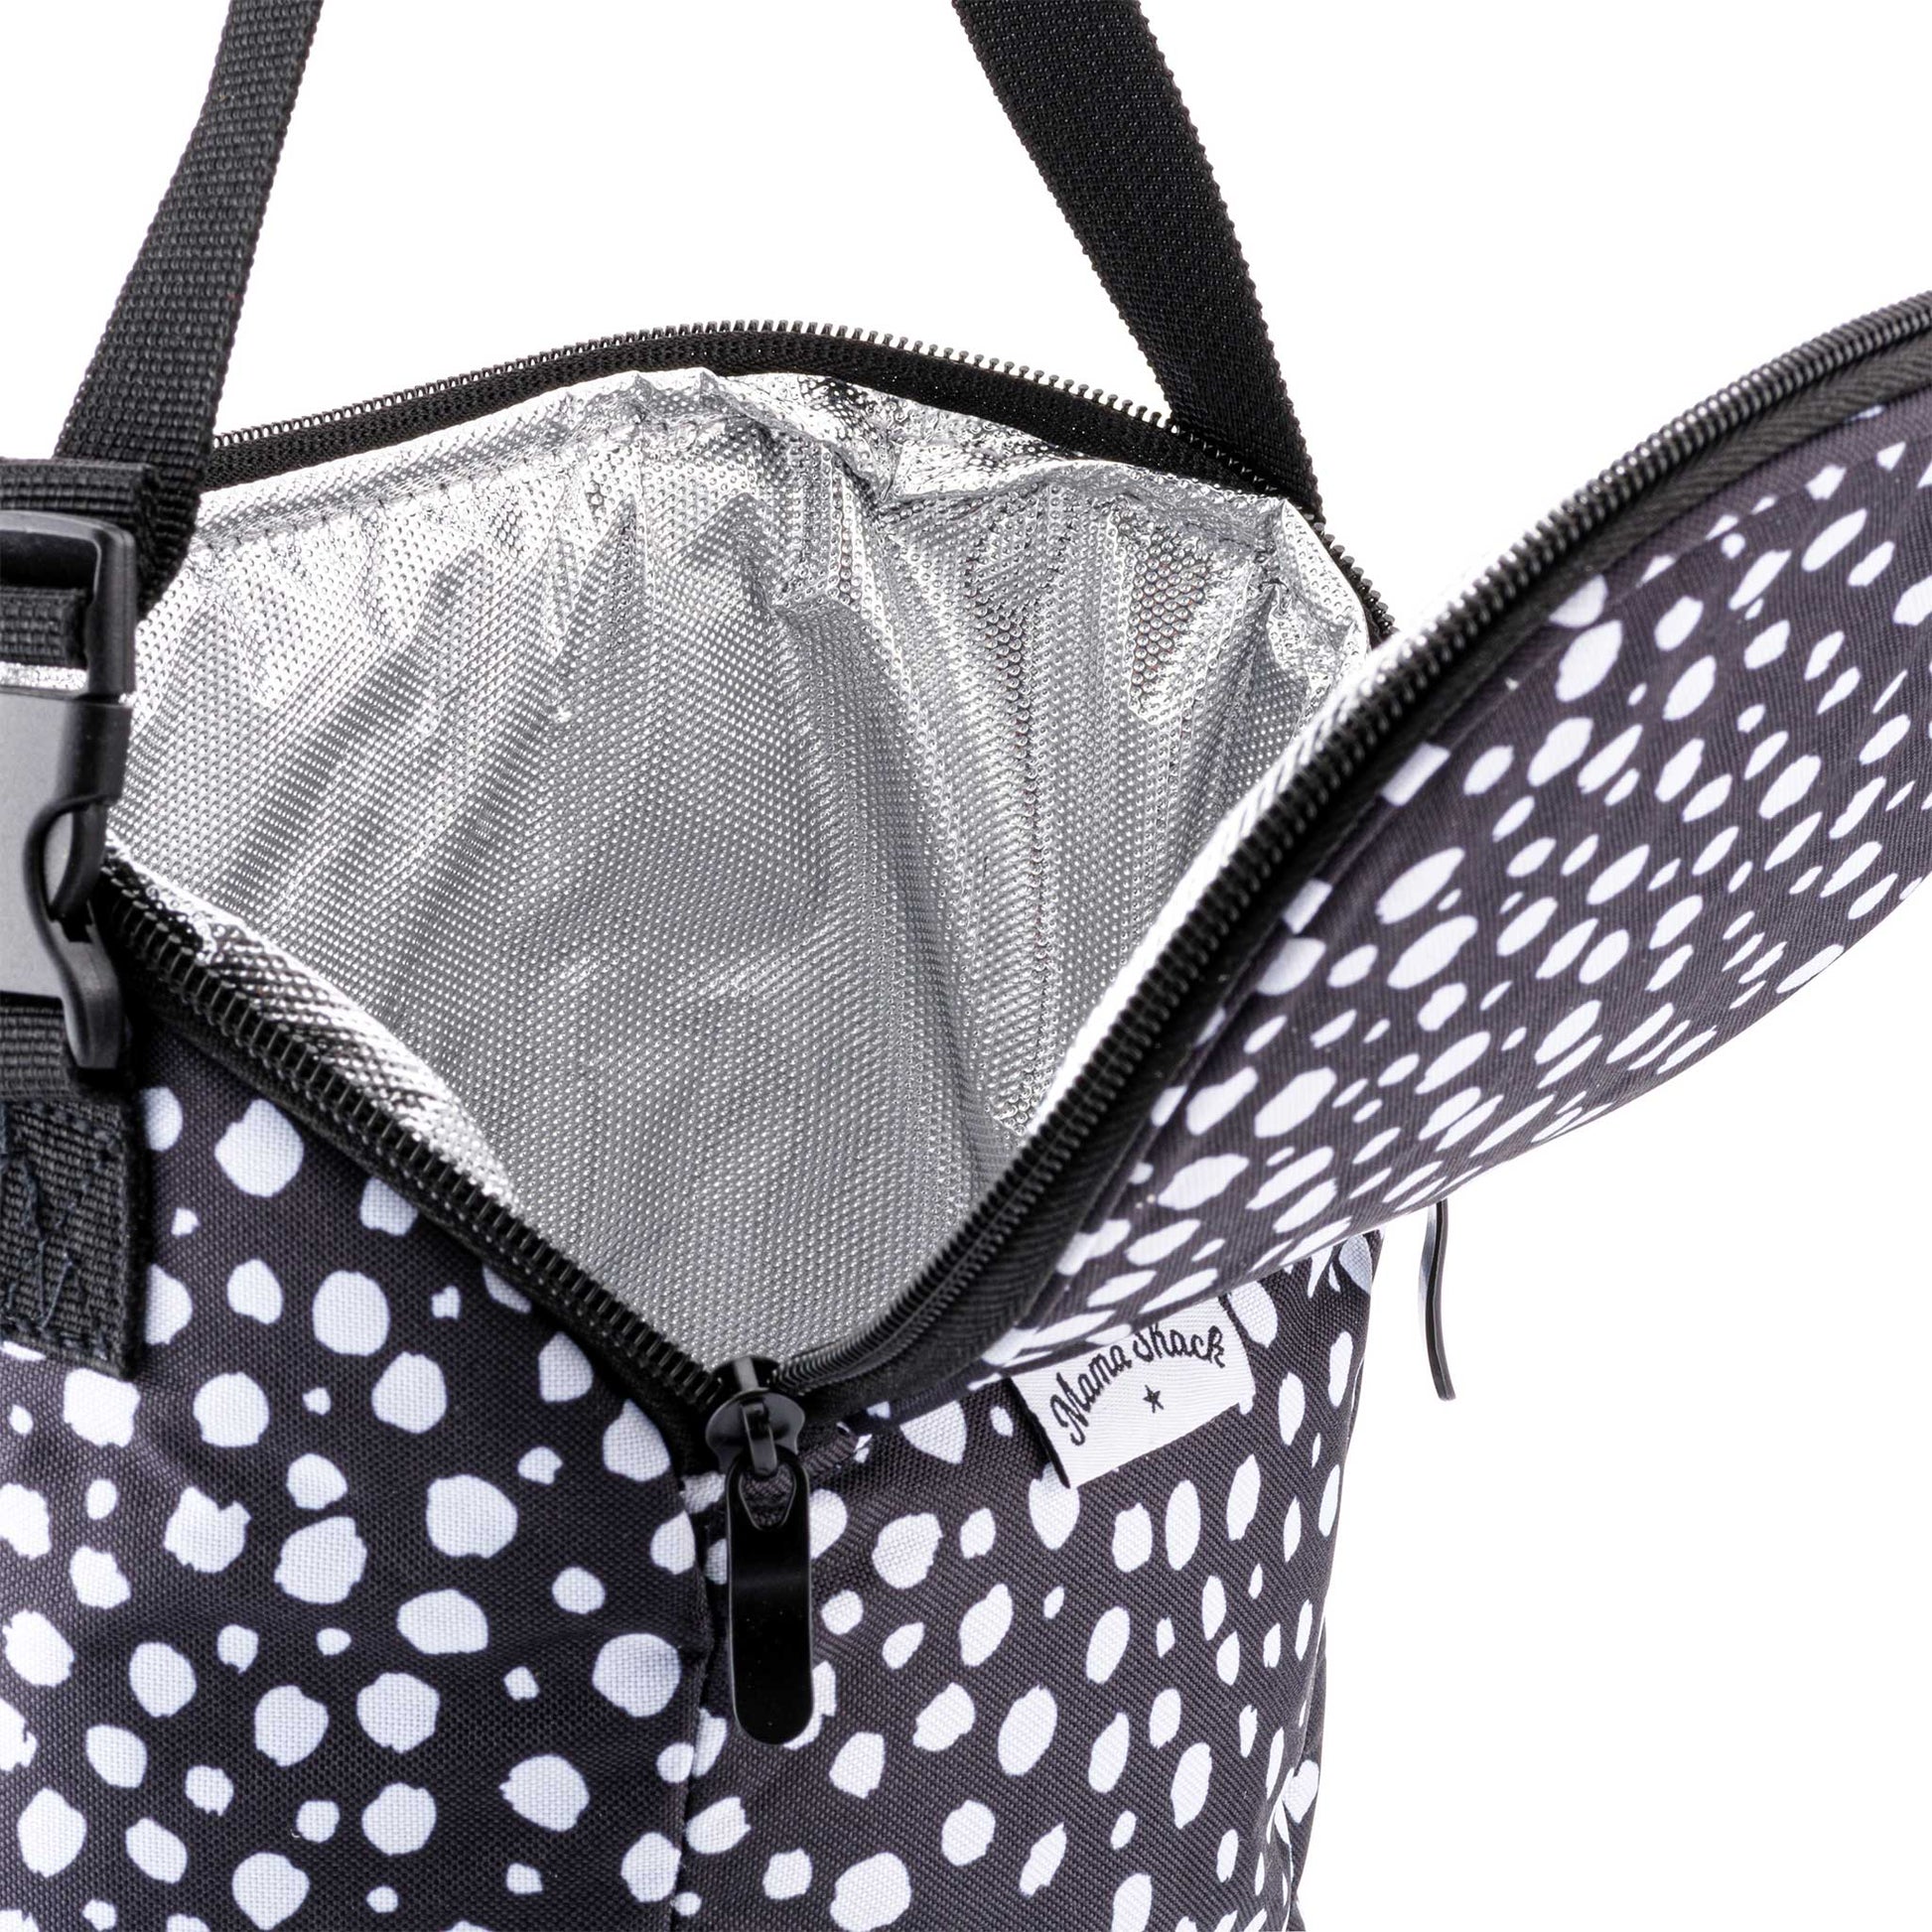 Insulated Baby Bottle and Lunch Bag - Black Spotty